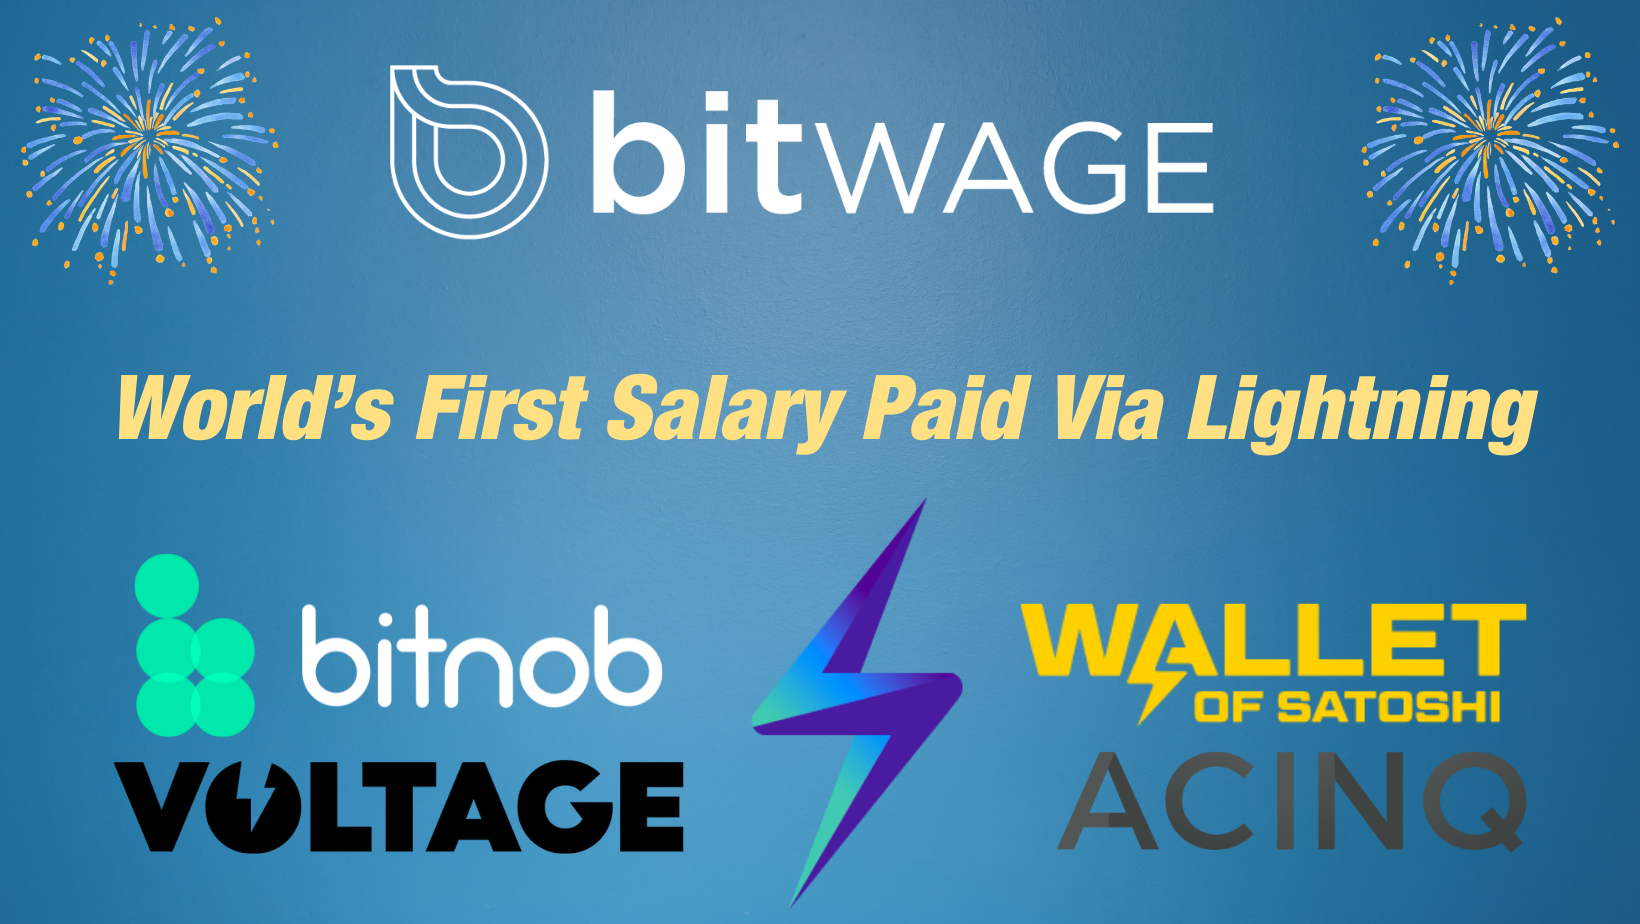 Bitwage Becomes World’s First Company to Process Salary Payments on Lightning